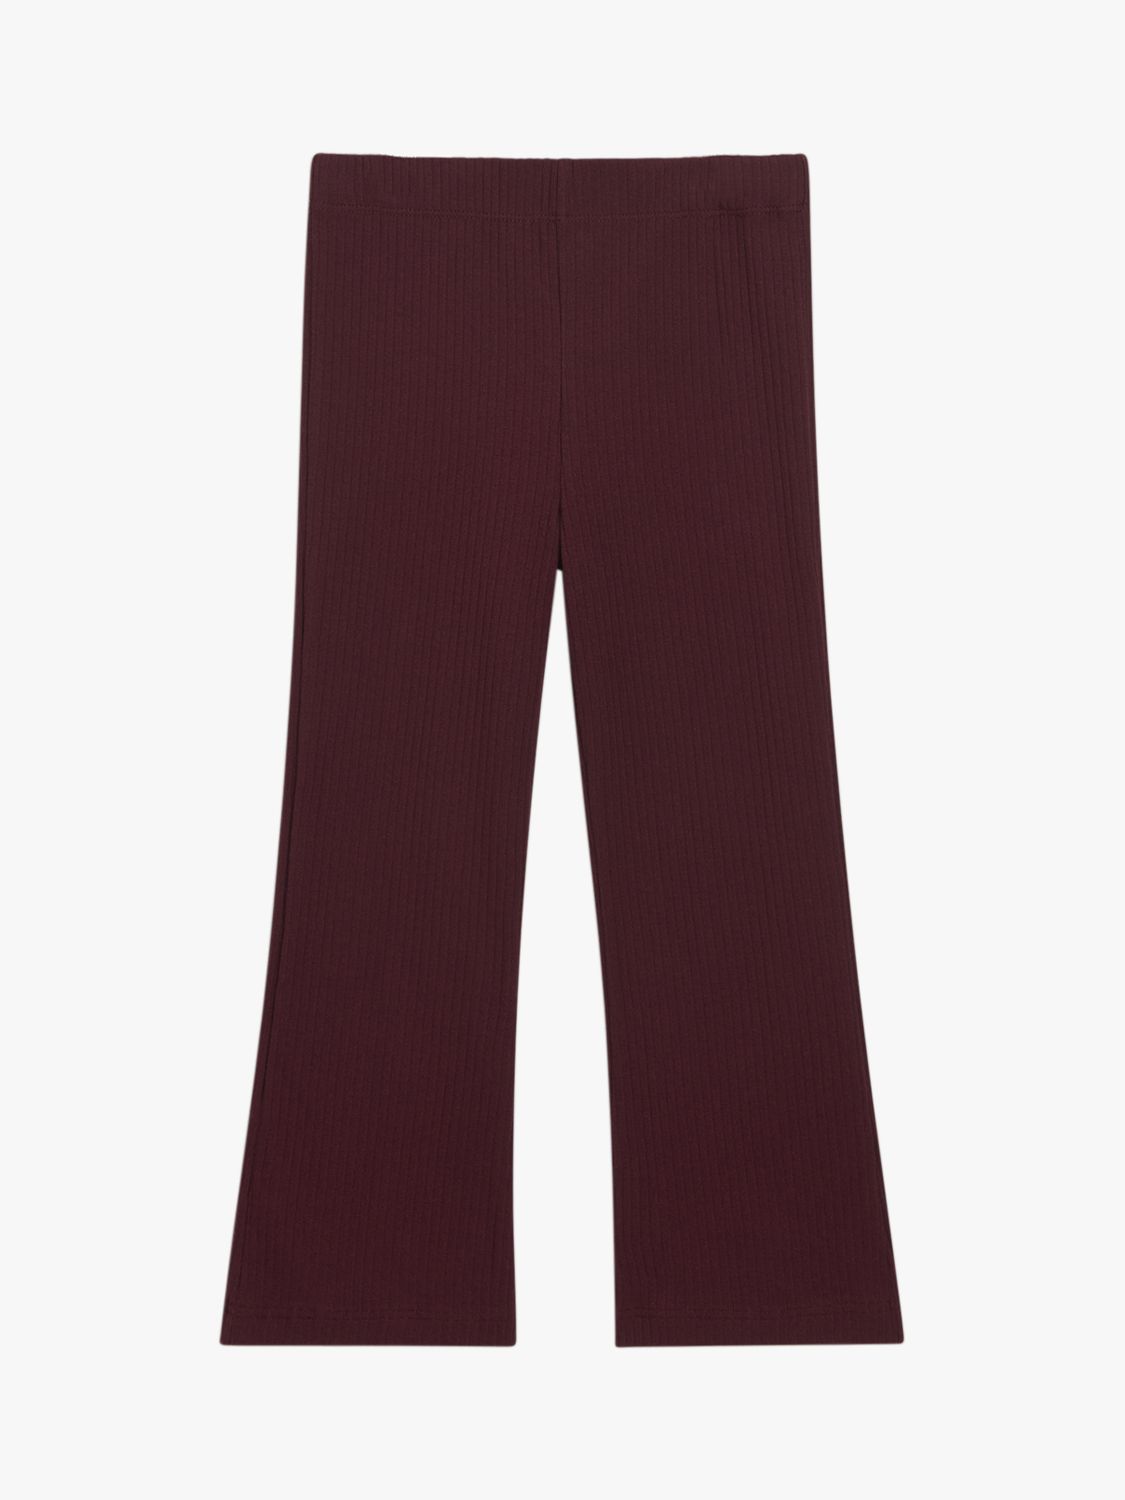 Whistles Kids' Ribbed Flare Trousers, Aubergine at John Lewis & Partners